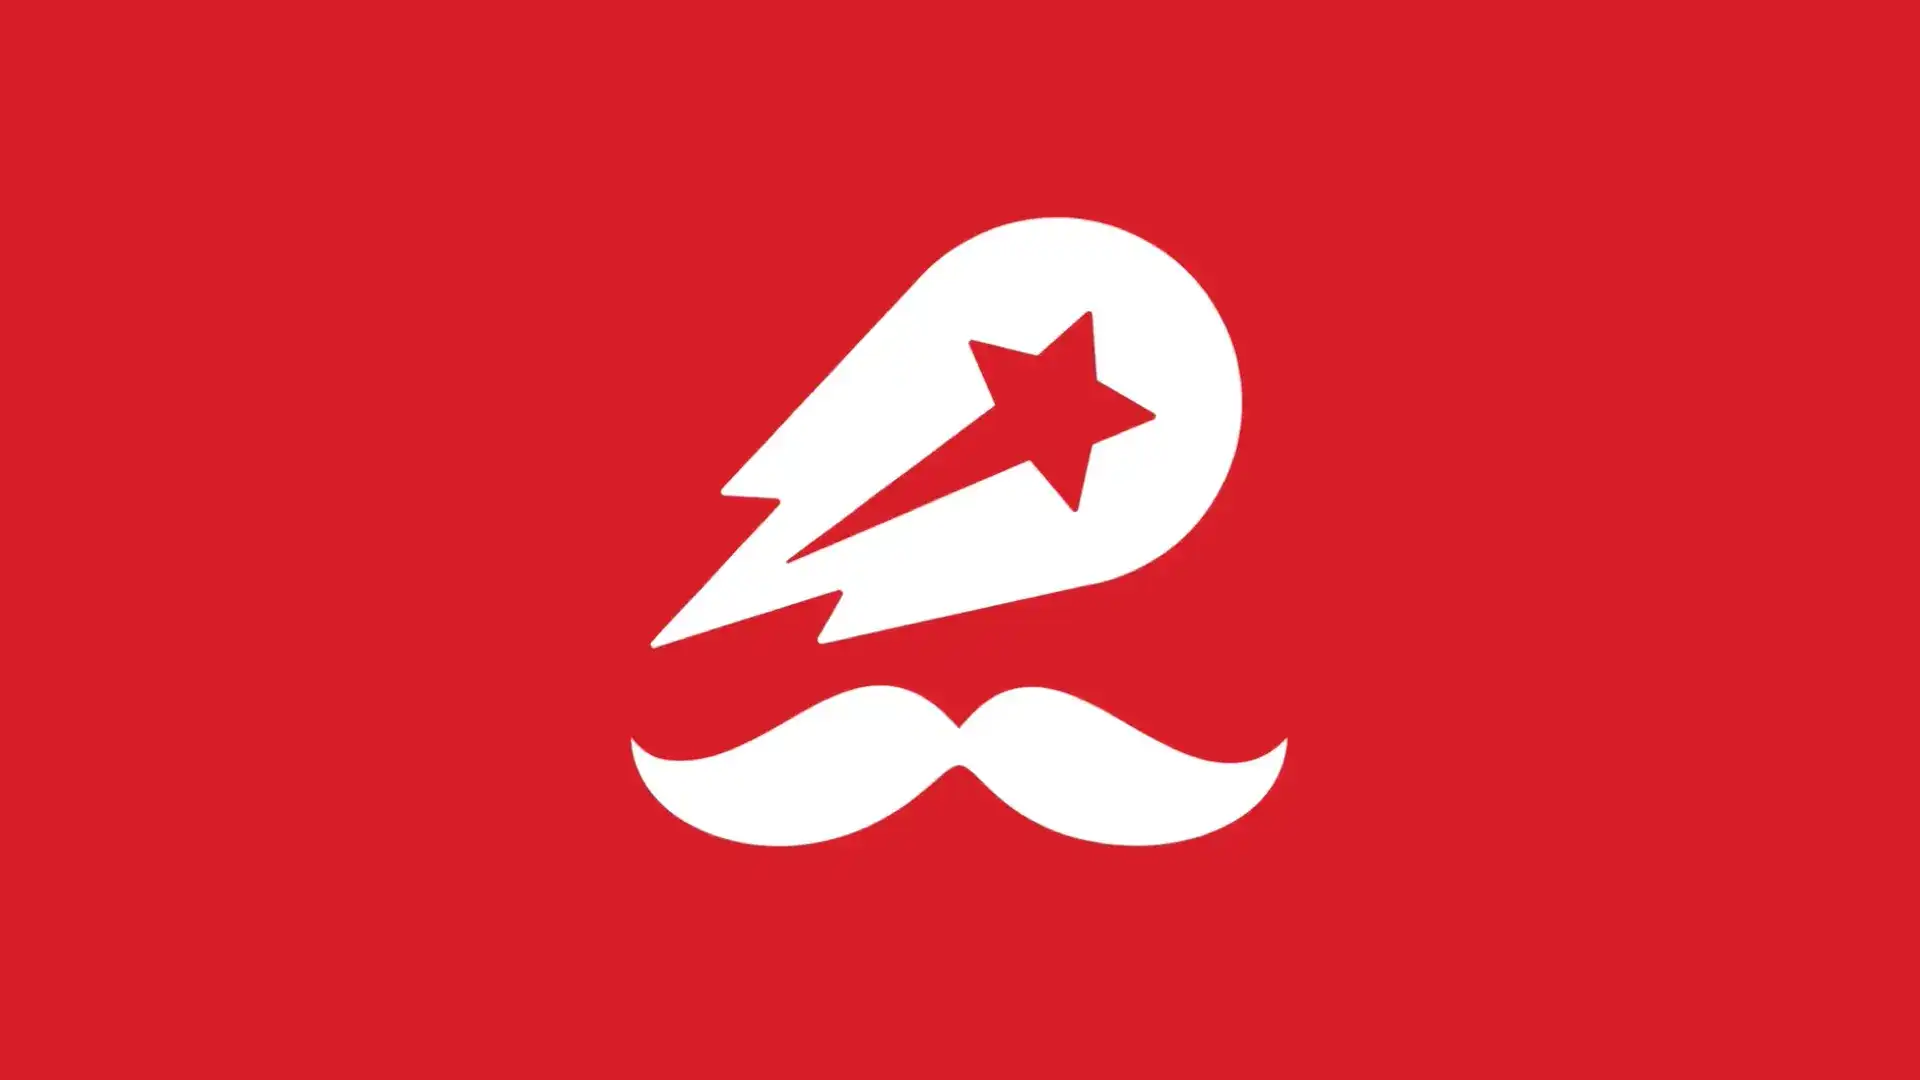 Getting into the Movember spirit at Delivery Hero